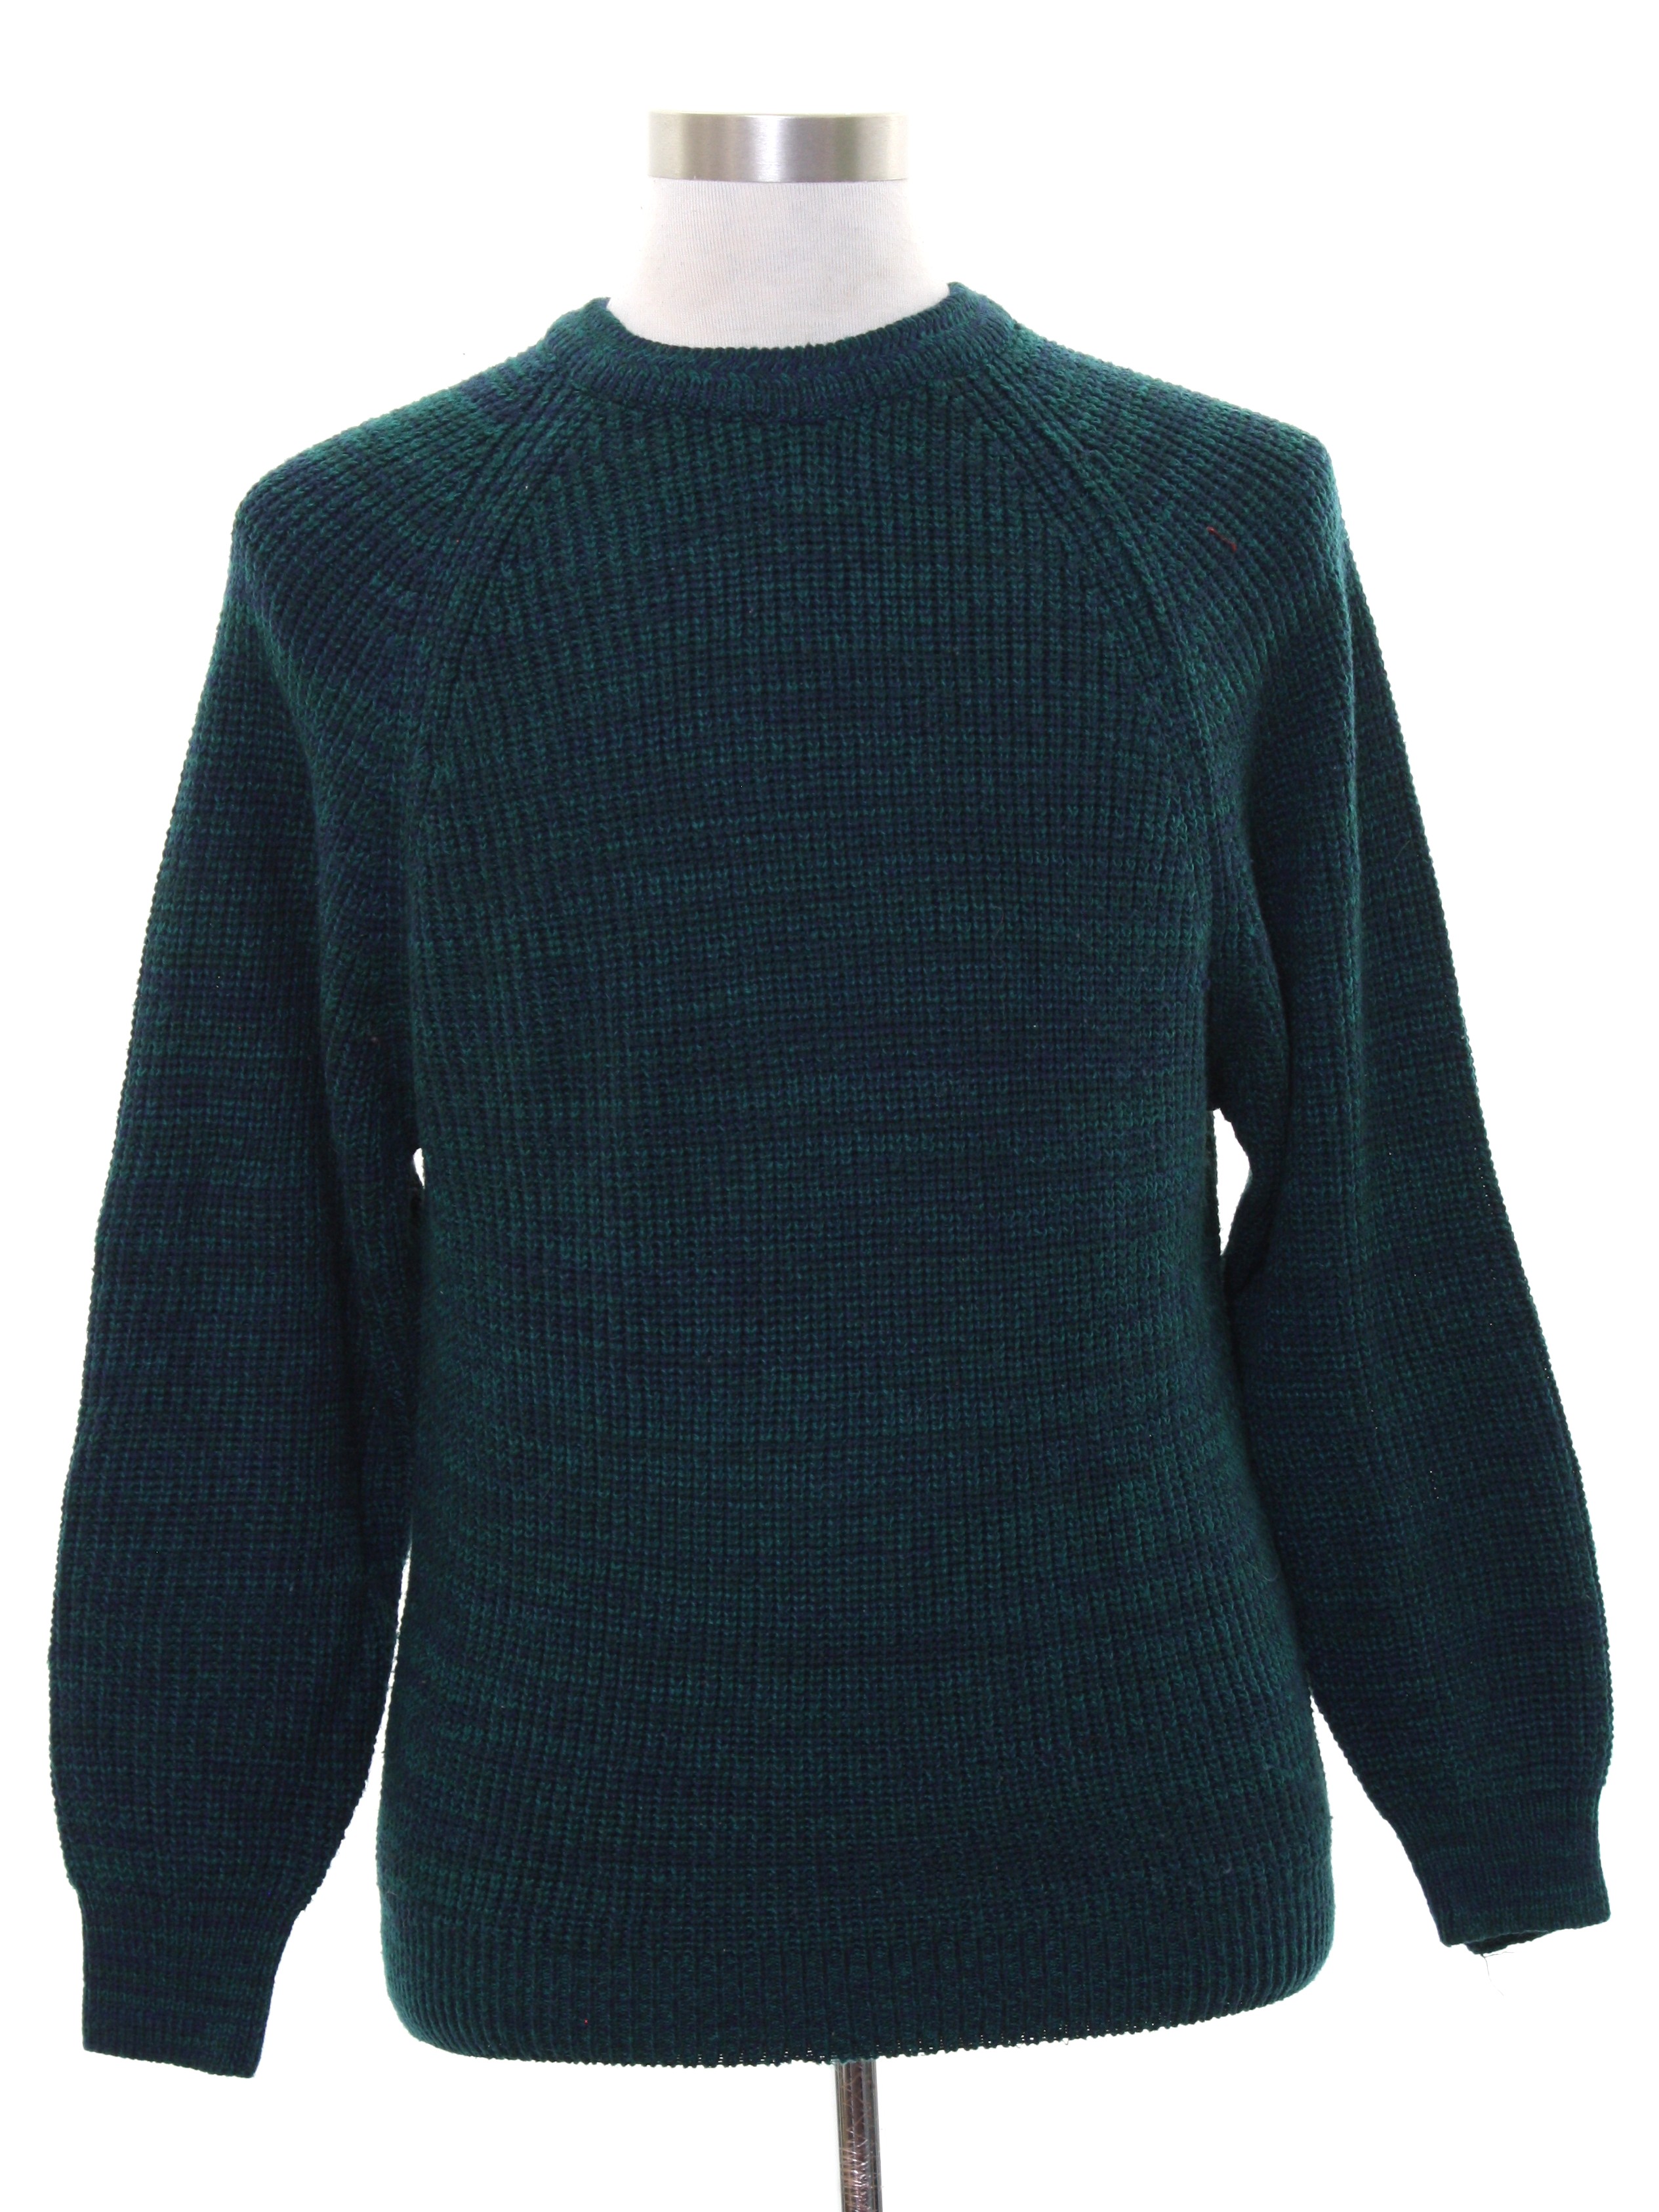 1980's Sweater (Basic Editions): Late 80s or Early 90s -Basic Editions ...